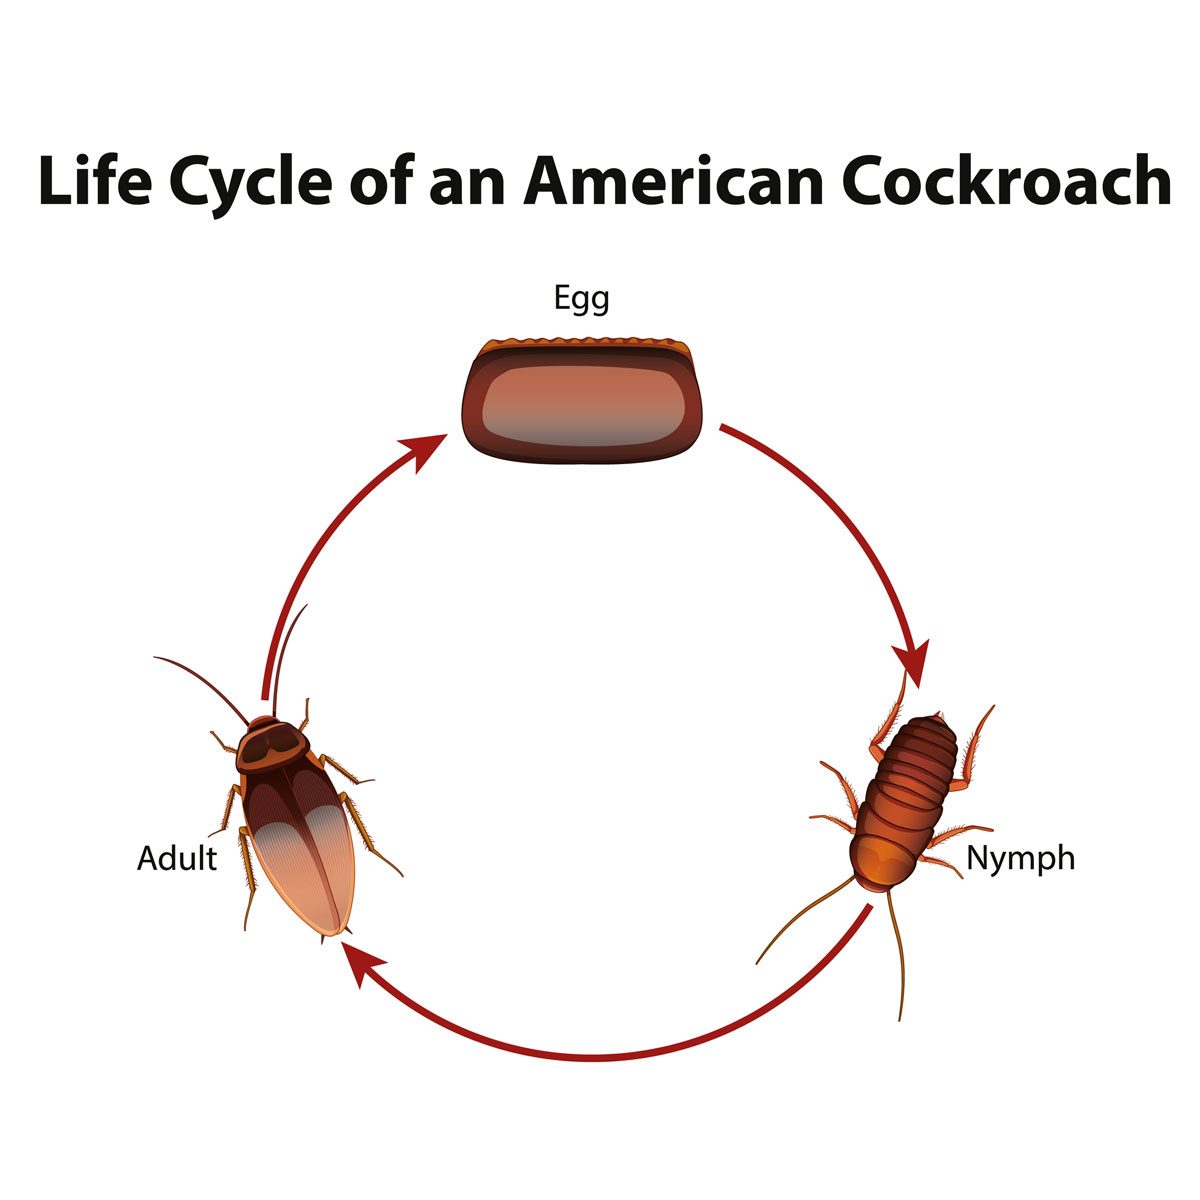 Do cockroaches lay eggs or nymphs?